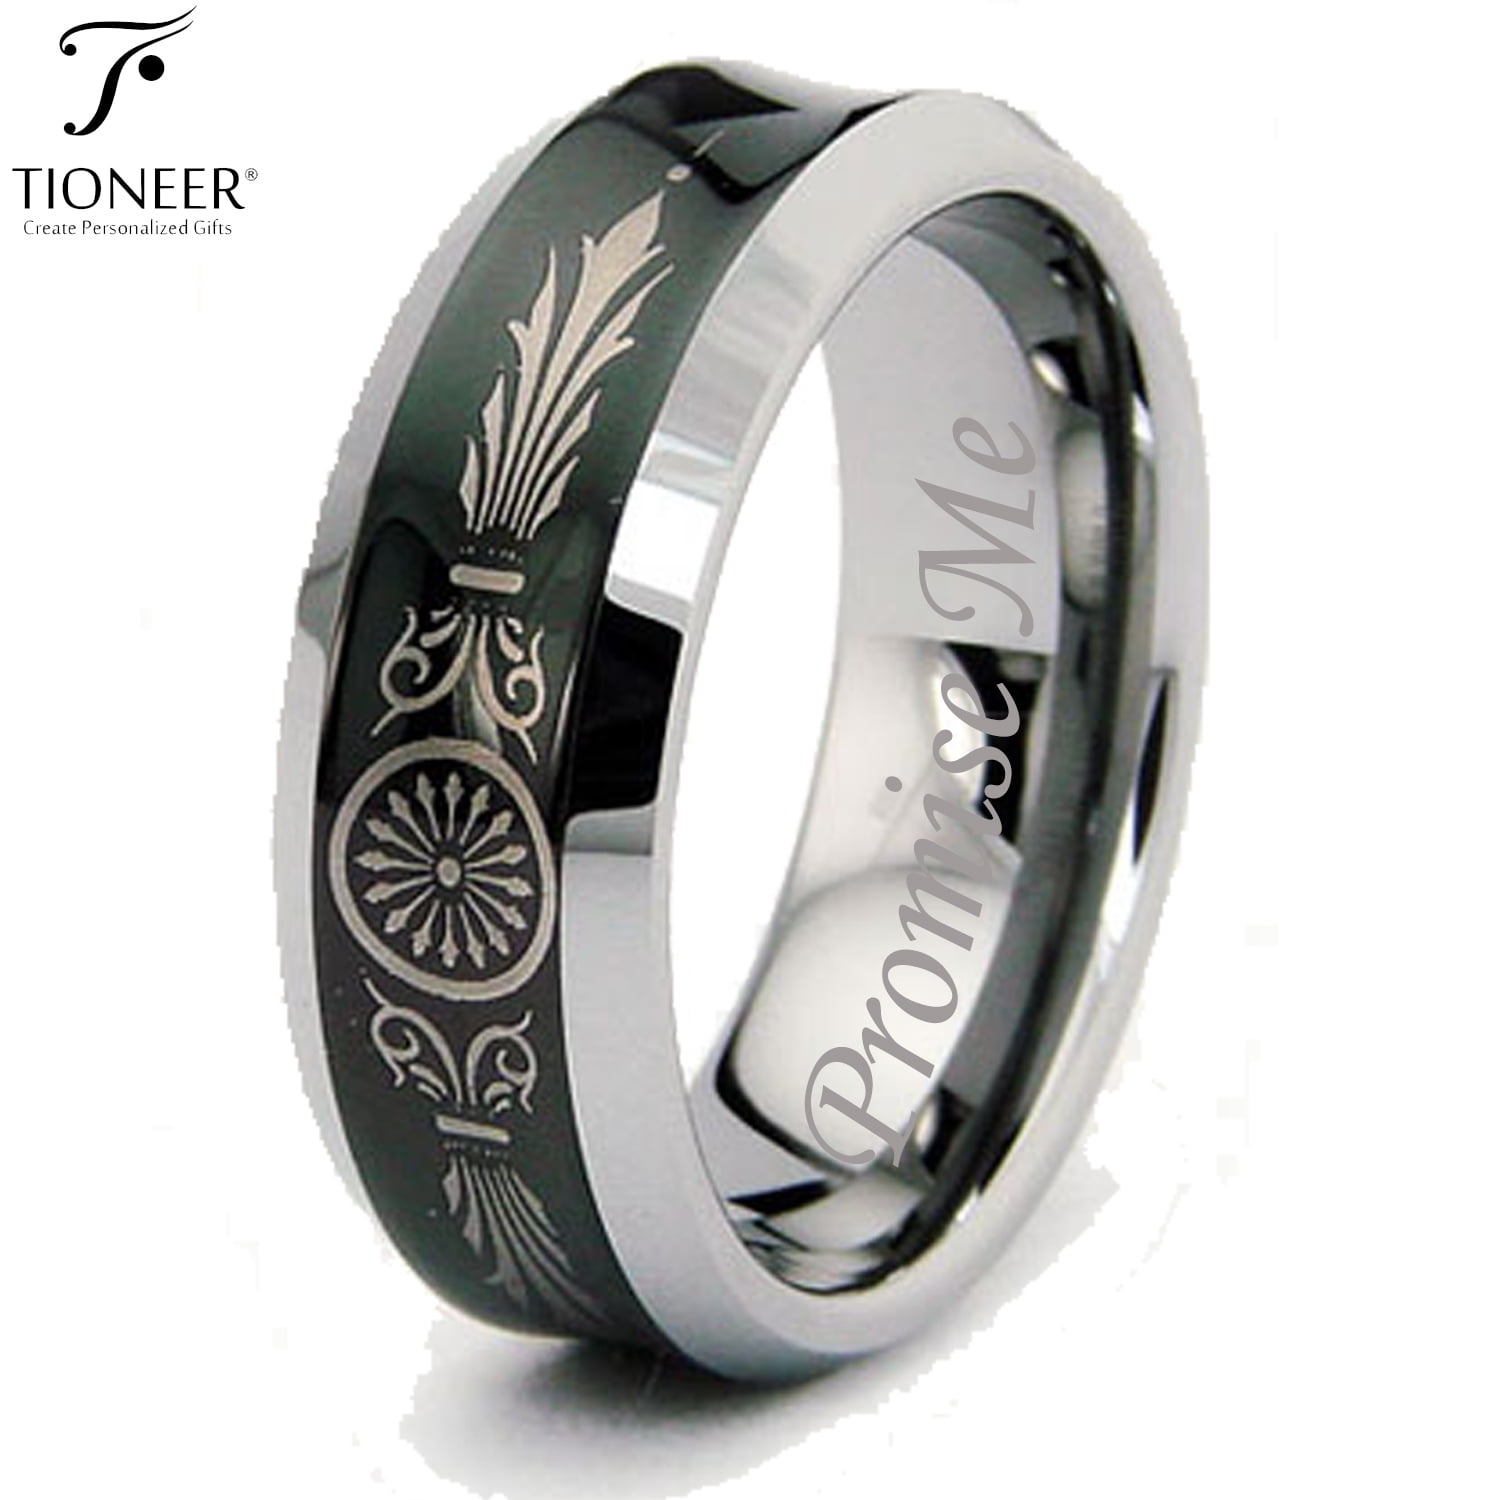 3 Kings Gothic Ring Sterling Silver Wedding Band